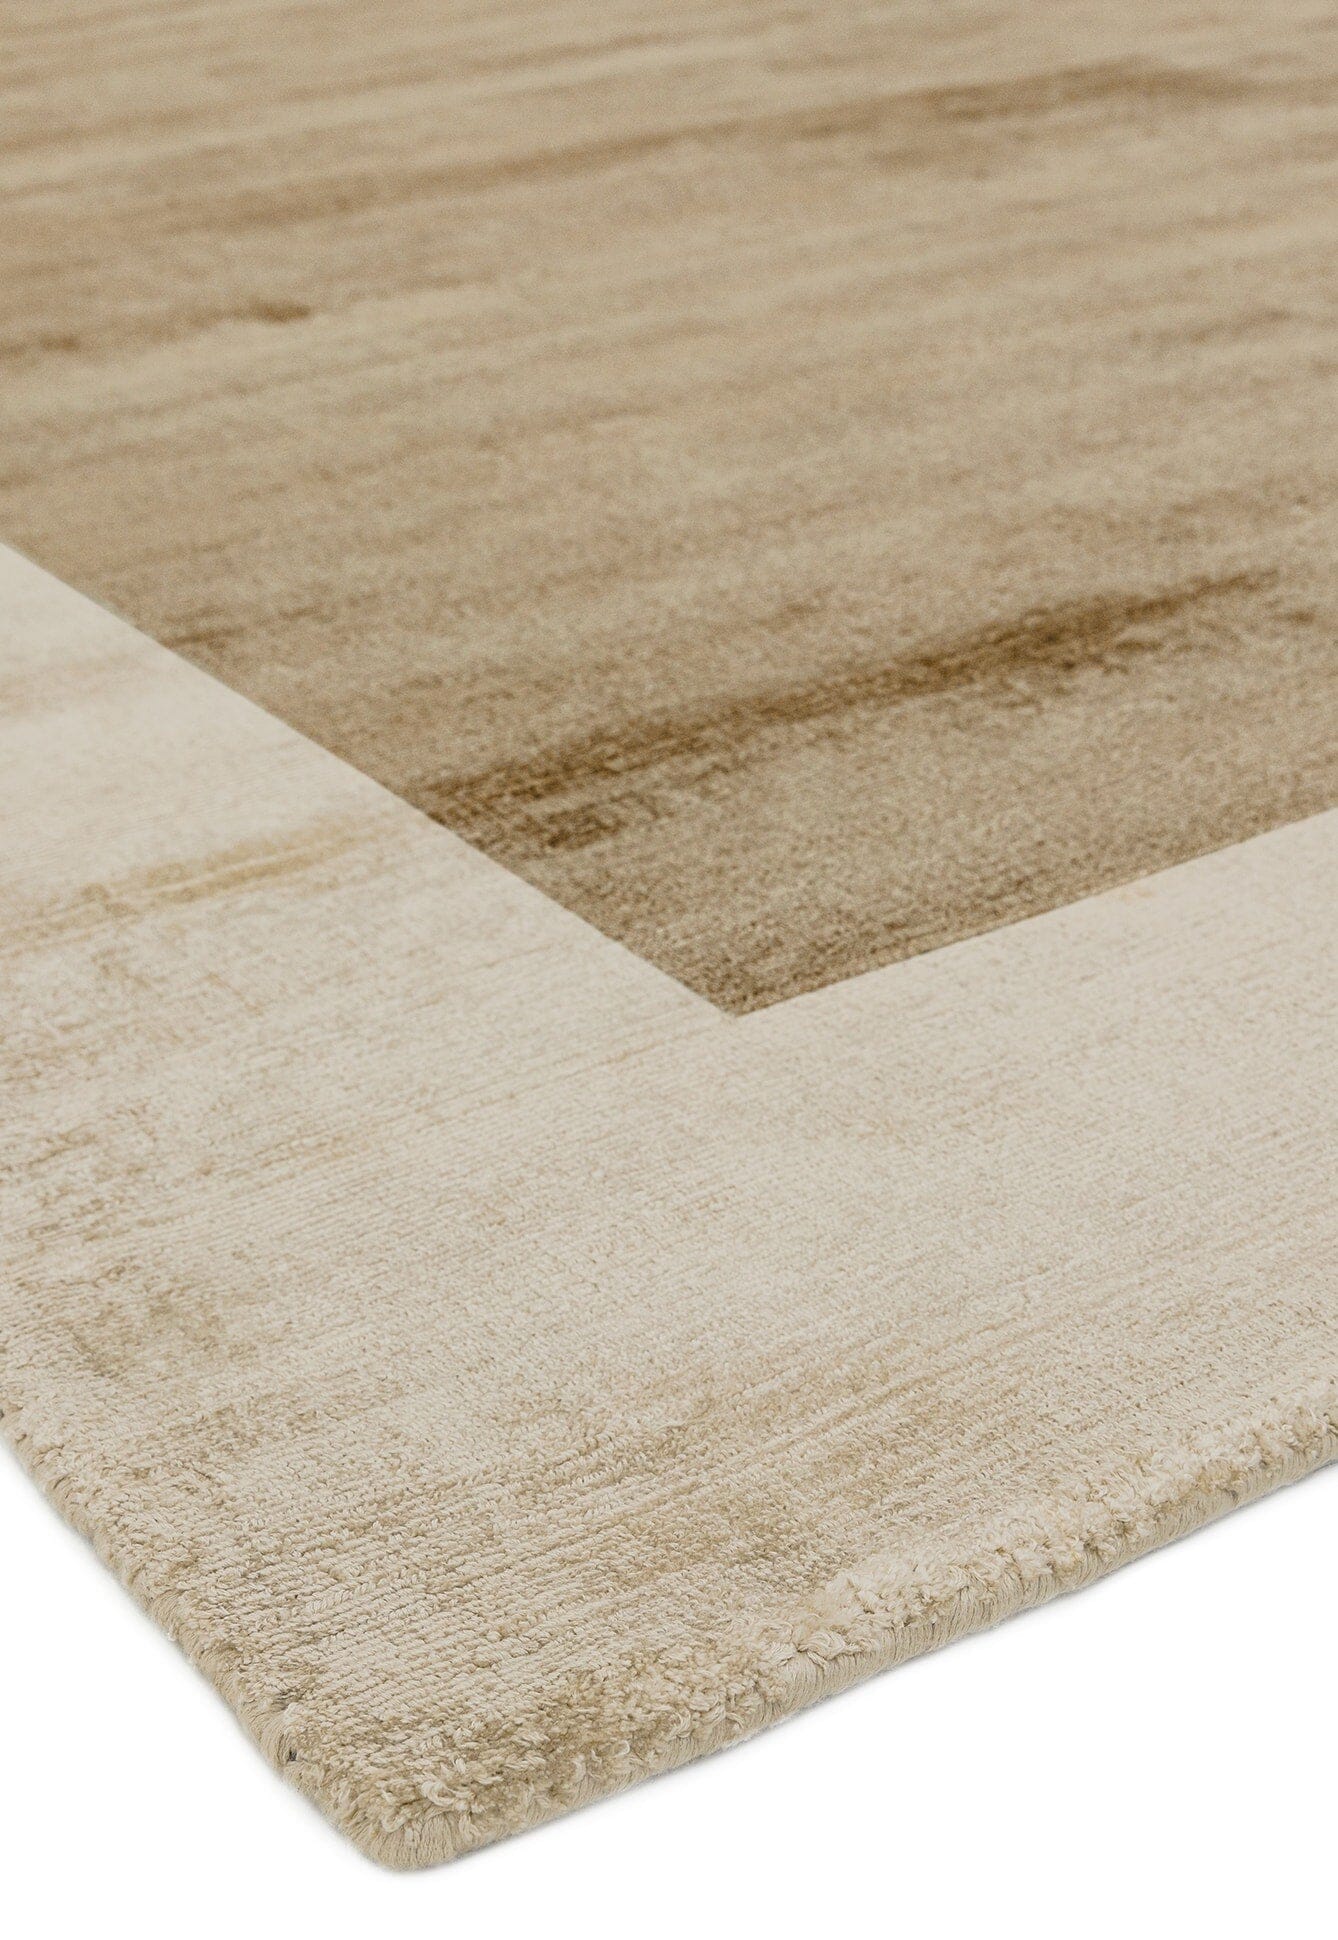  Asiatic Carpets-Asiatic Carpets Blade Hand Woven Rug Putty Champagne - 200 x 290cm-Beige, Natural 309 